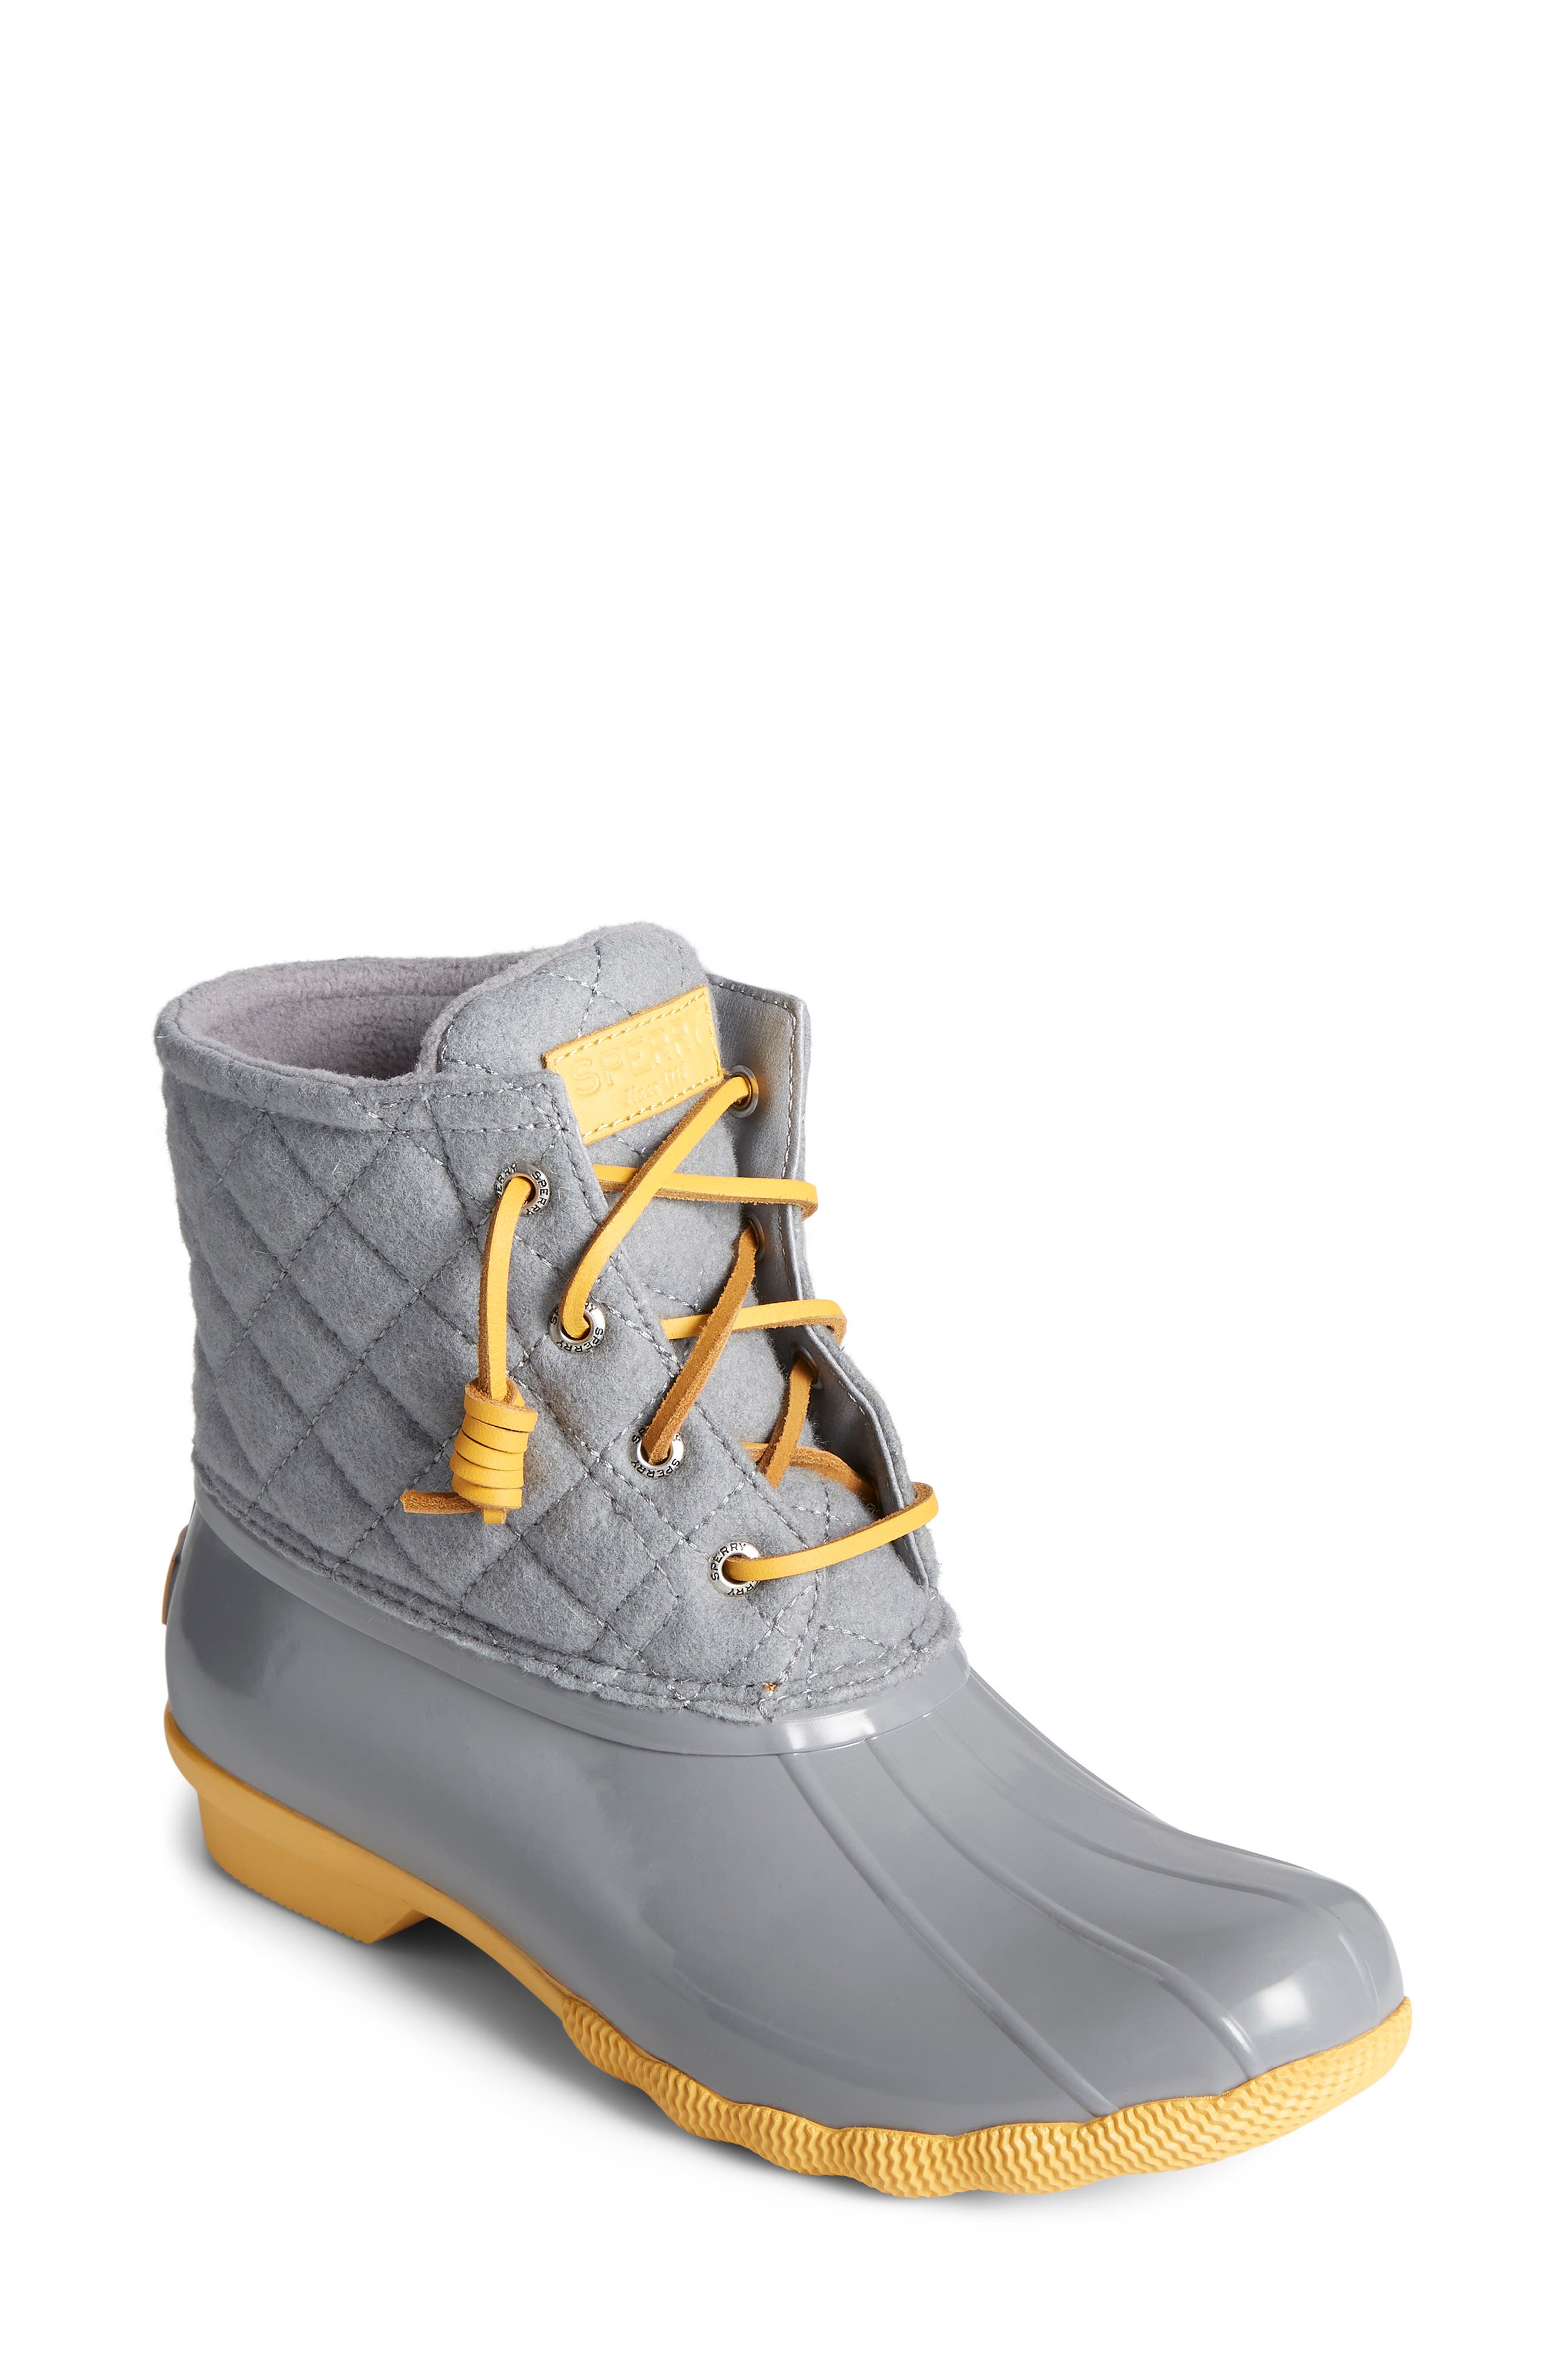 Sperry Womens Saltwater Shiny Quilted Rain Boot